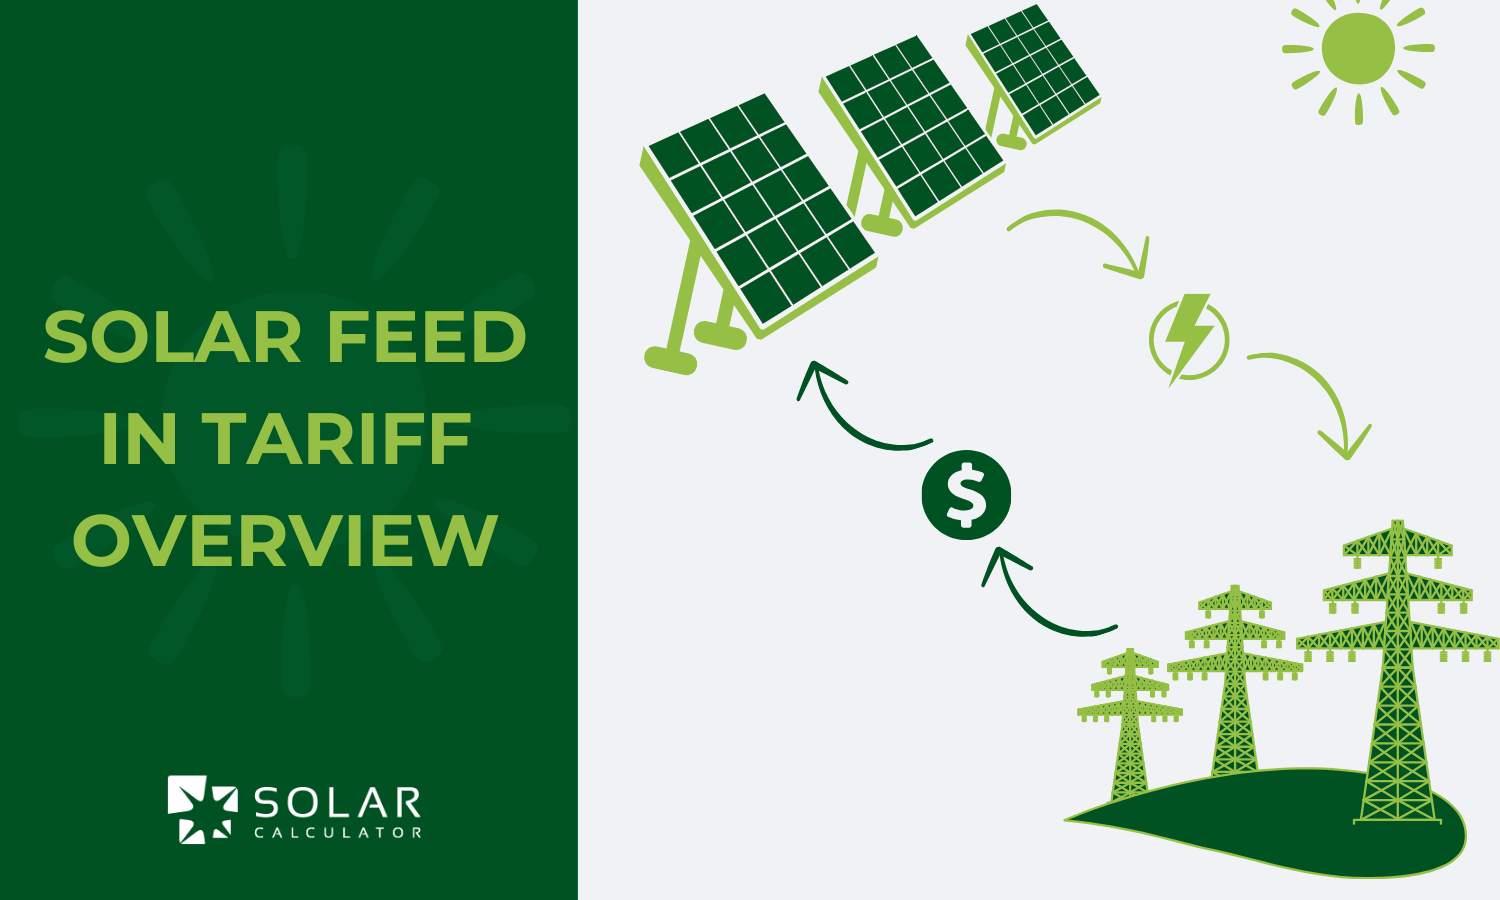 Solar feed in tariff overview NSW